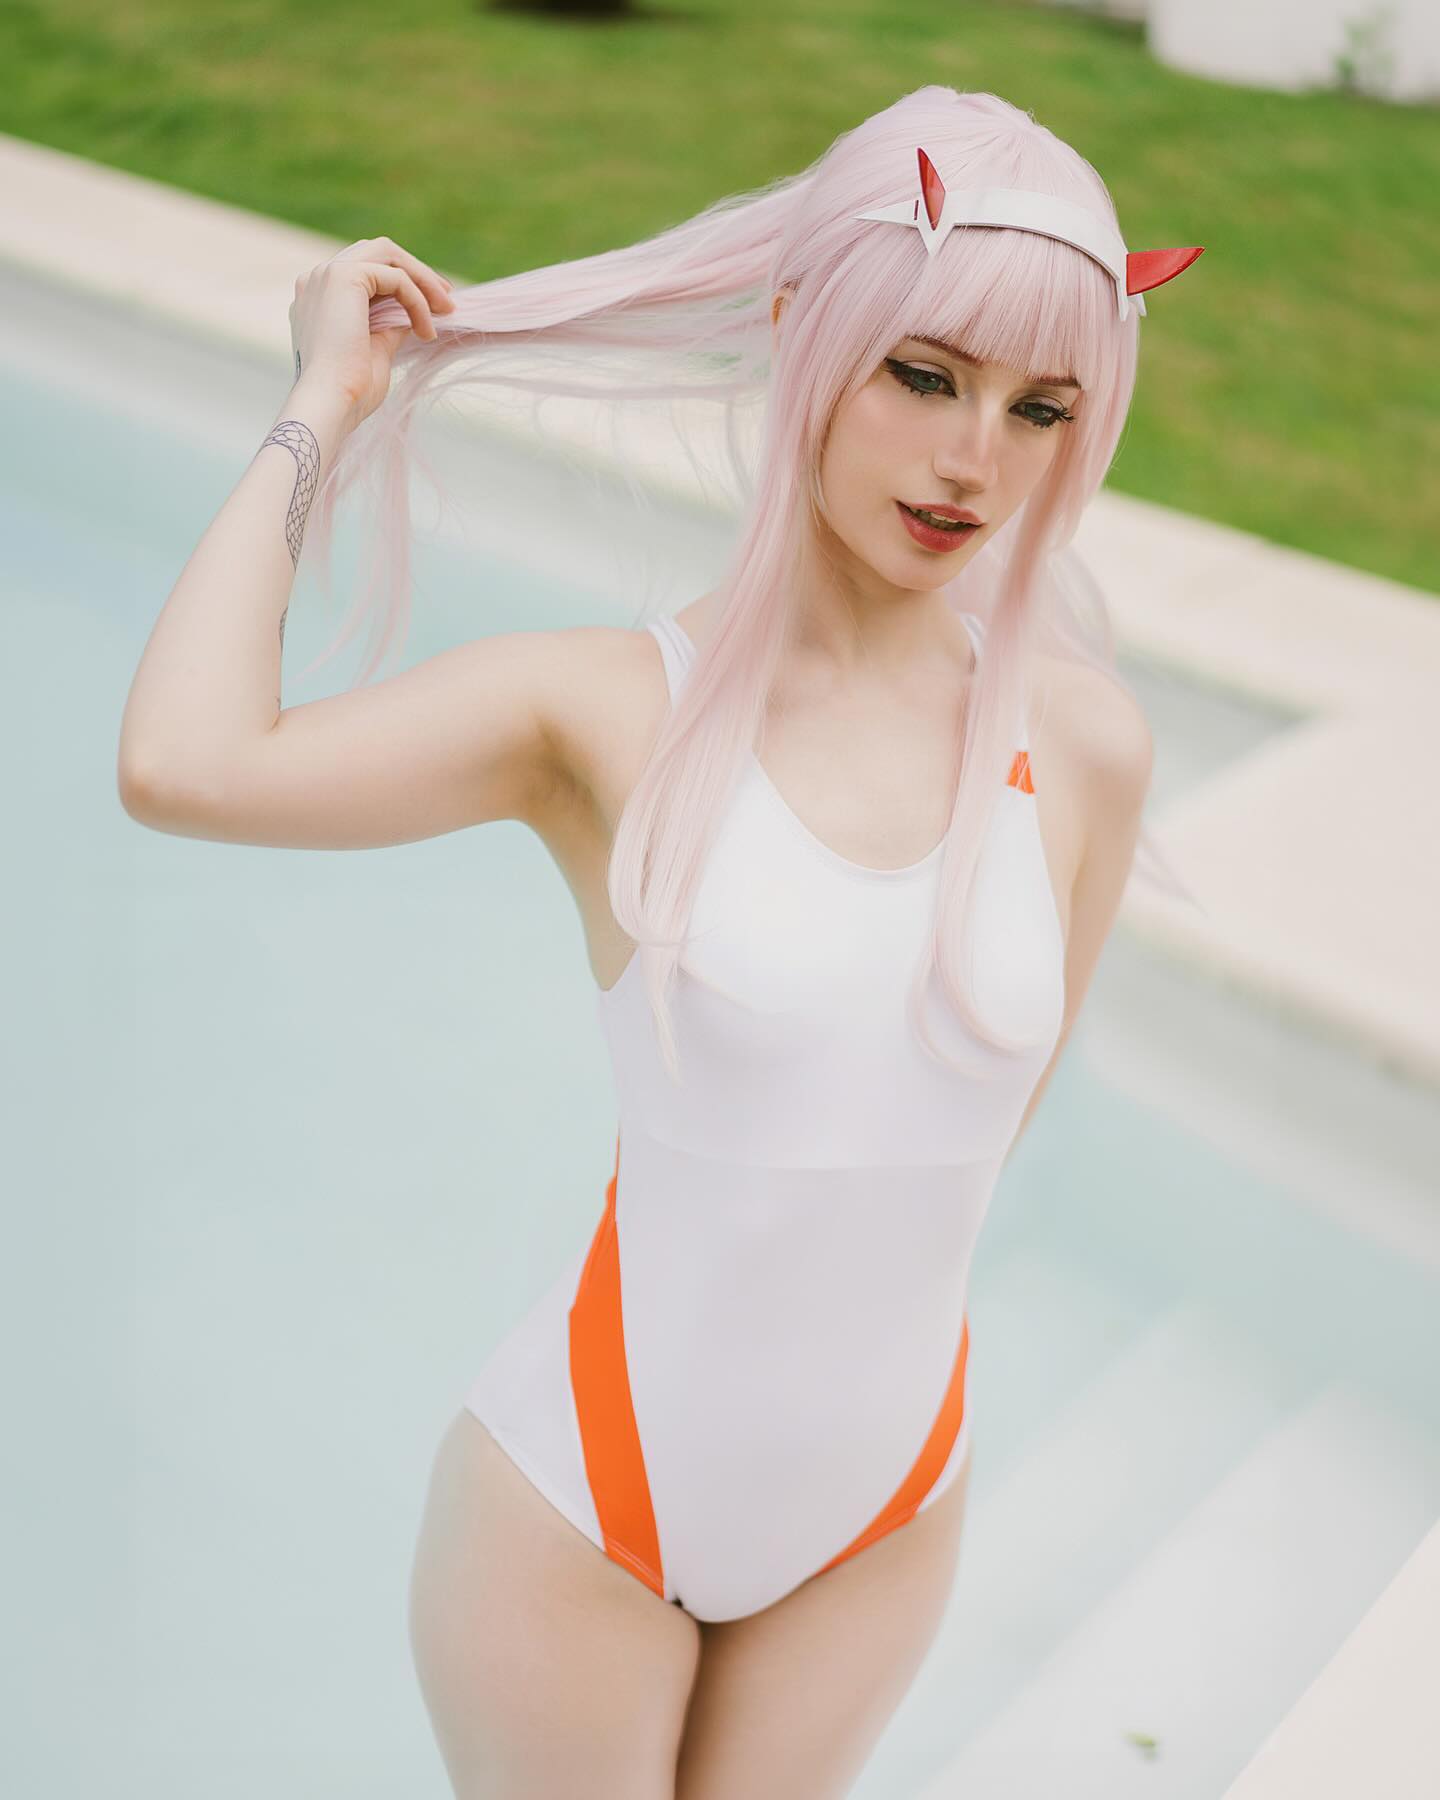 Come with me 🐟

More pics but this time in the pool! ✨ it was a little cold I’ll be honest hahaha but the sun was so bright I couldn’t even look into the camera 🤧 anyways this pics turned out so good 😳 what do you think? 

Get full pics on my P4tr30n only during March!

#zerotwo #zerotwocosplay #cosplay #cosplayer #waifu #animecosplay #darlinginthefranxx